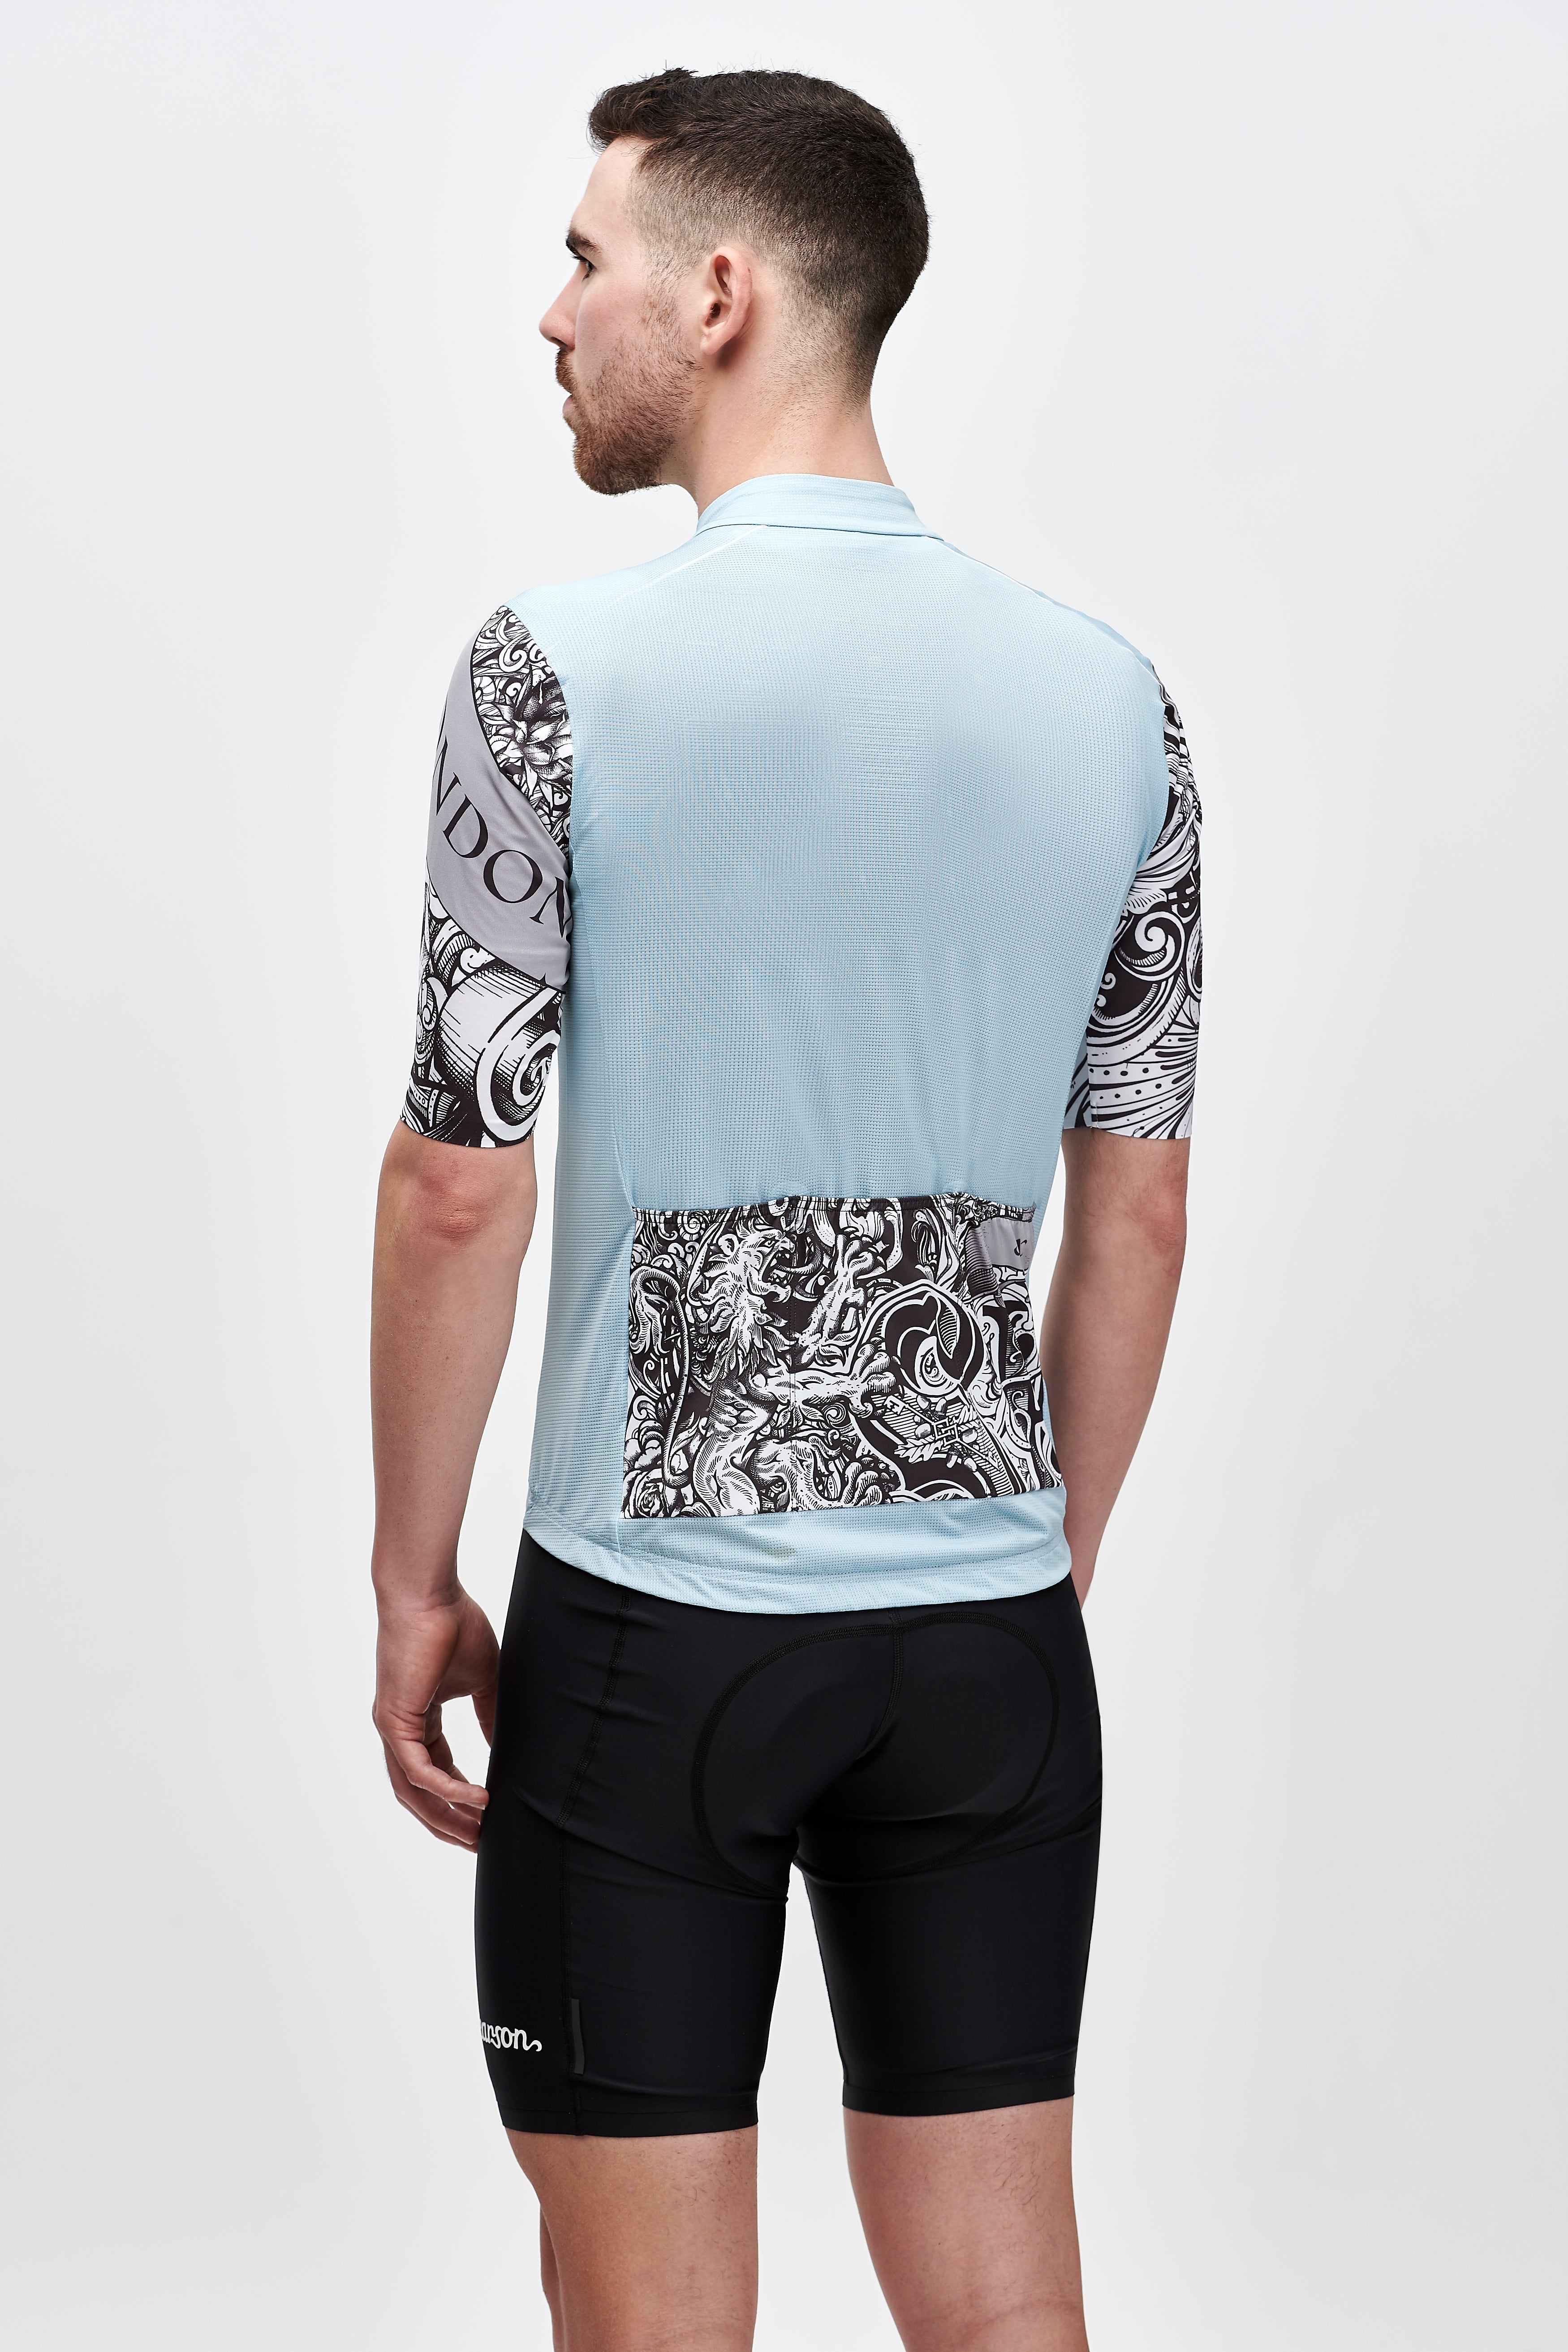 Greg Coulton X Pearson Limited Edition Cycling Apparel - Pearson1860